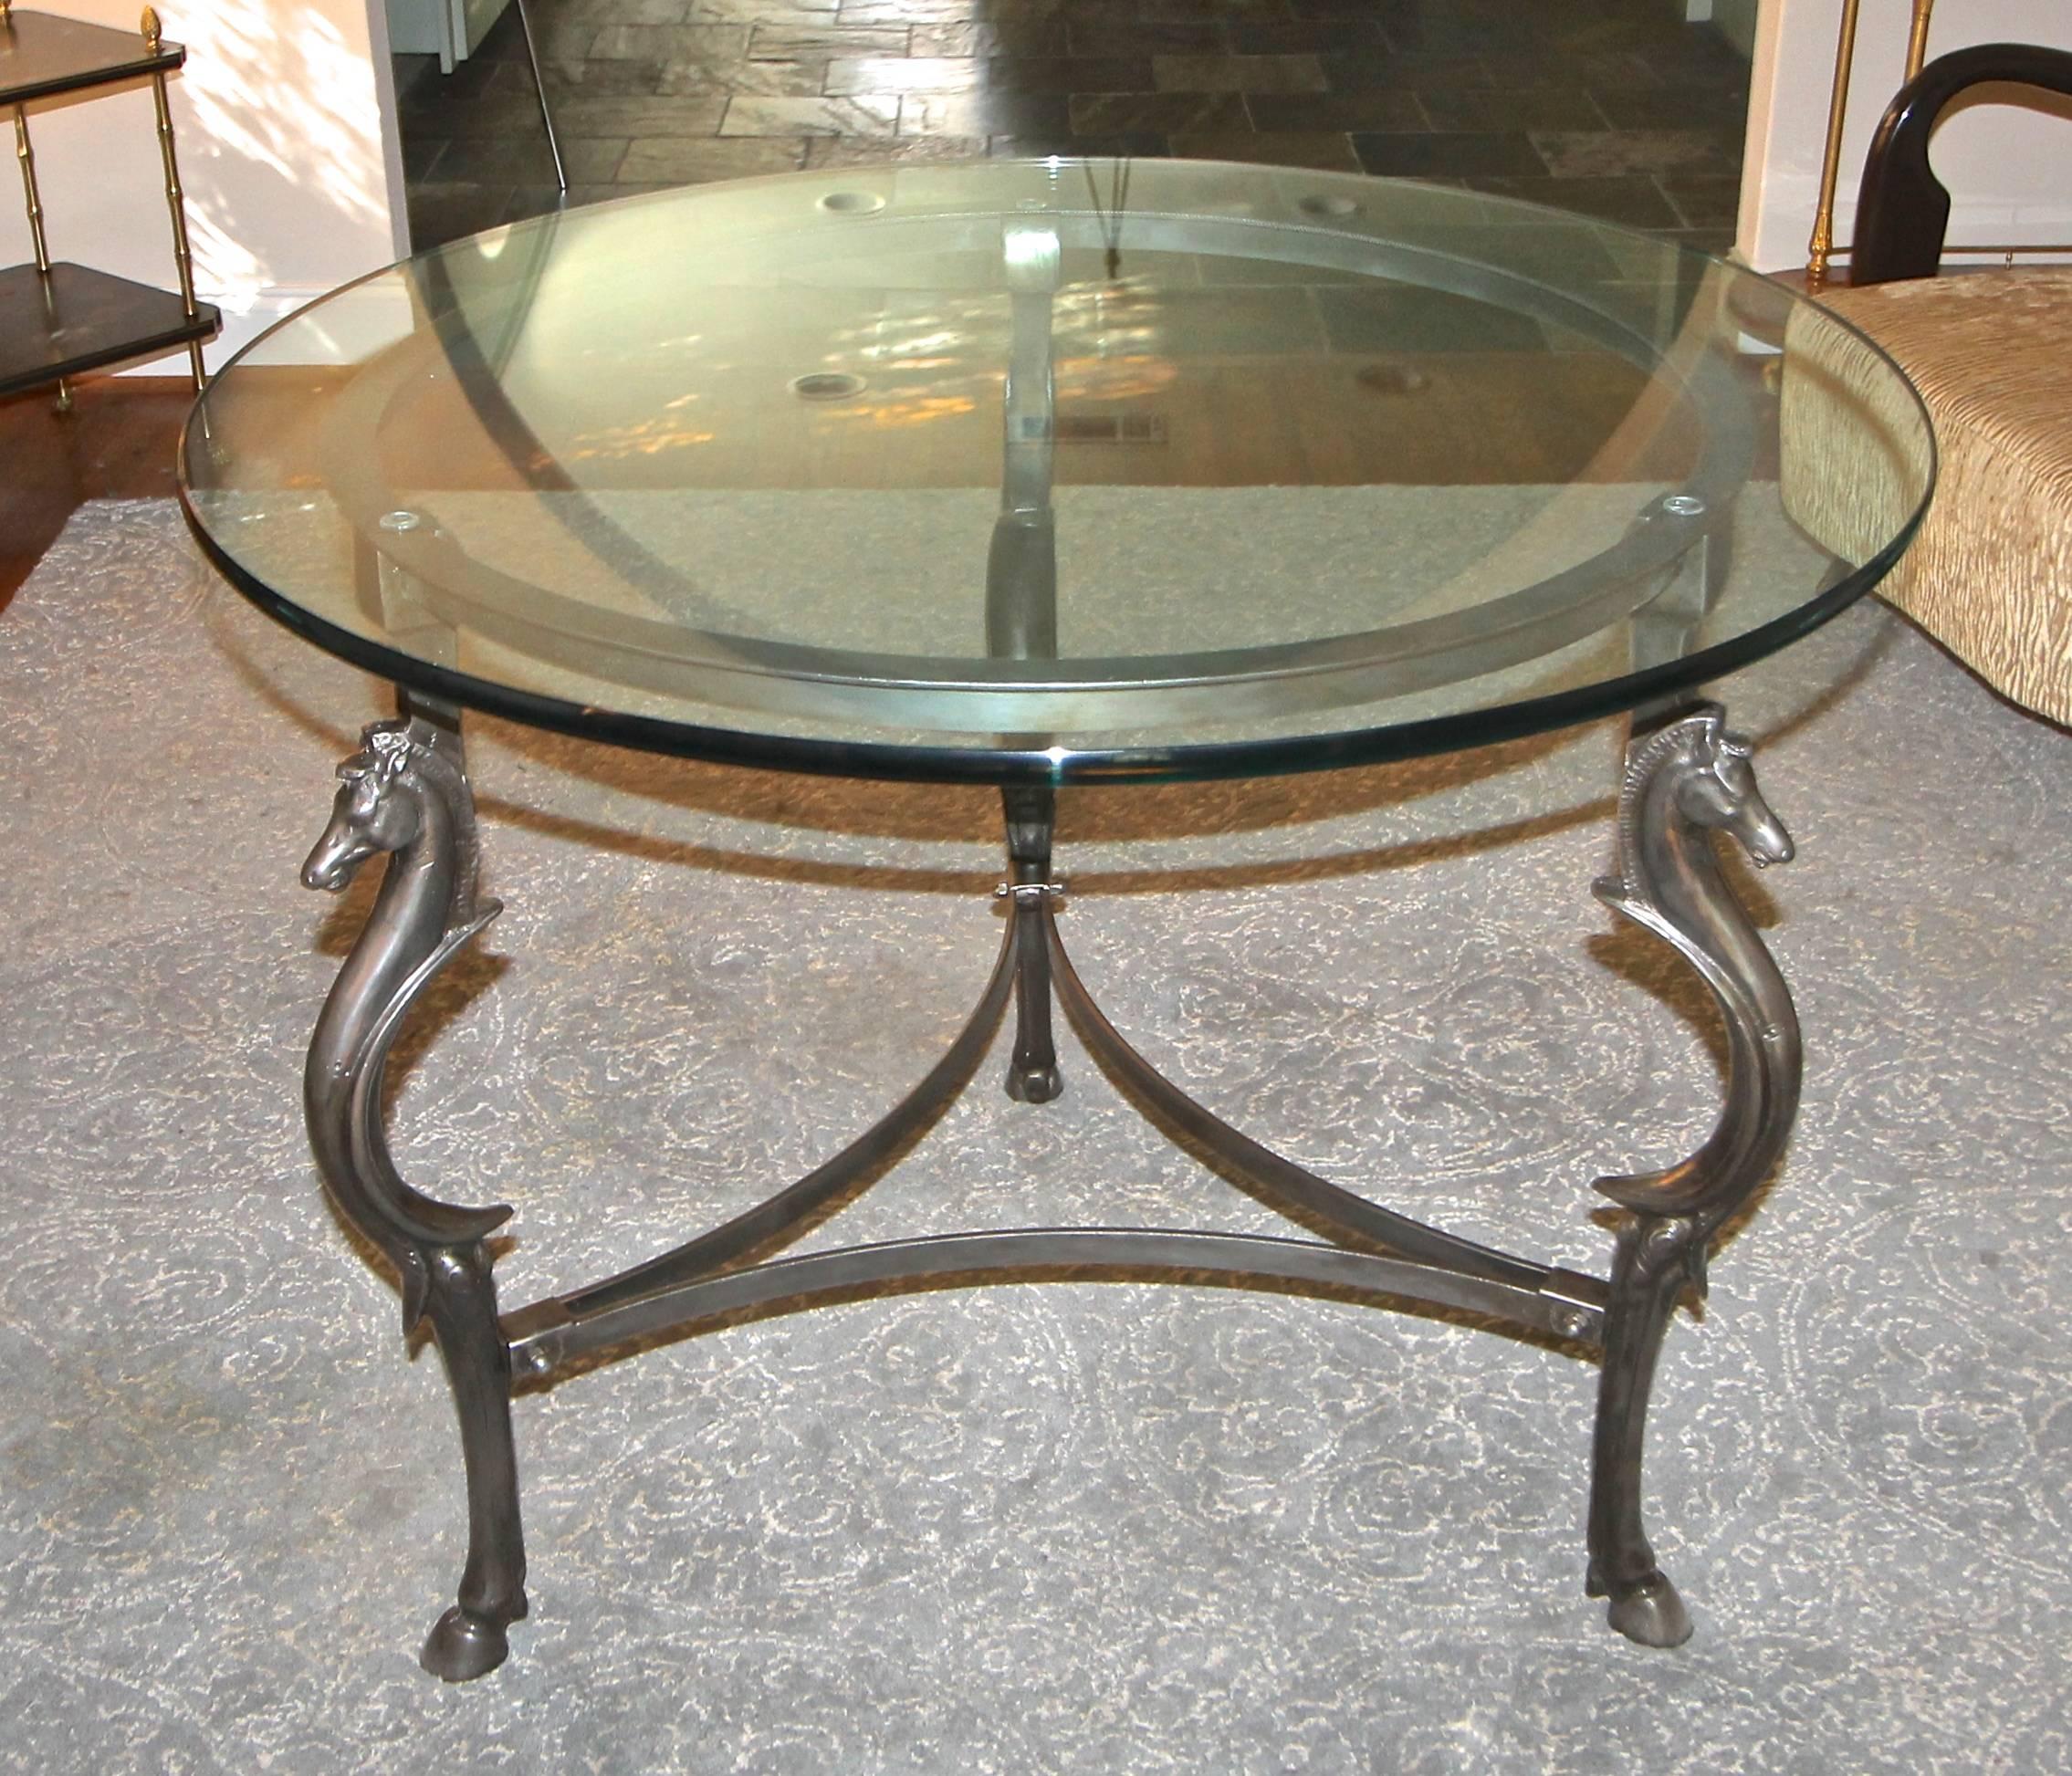 Center table with decorative cast steel horse (equestrian) motif legs. Thick round glass top rests atop. Possibly French in style of Maison Jansen or Moreux.